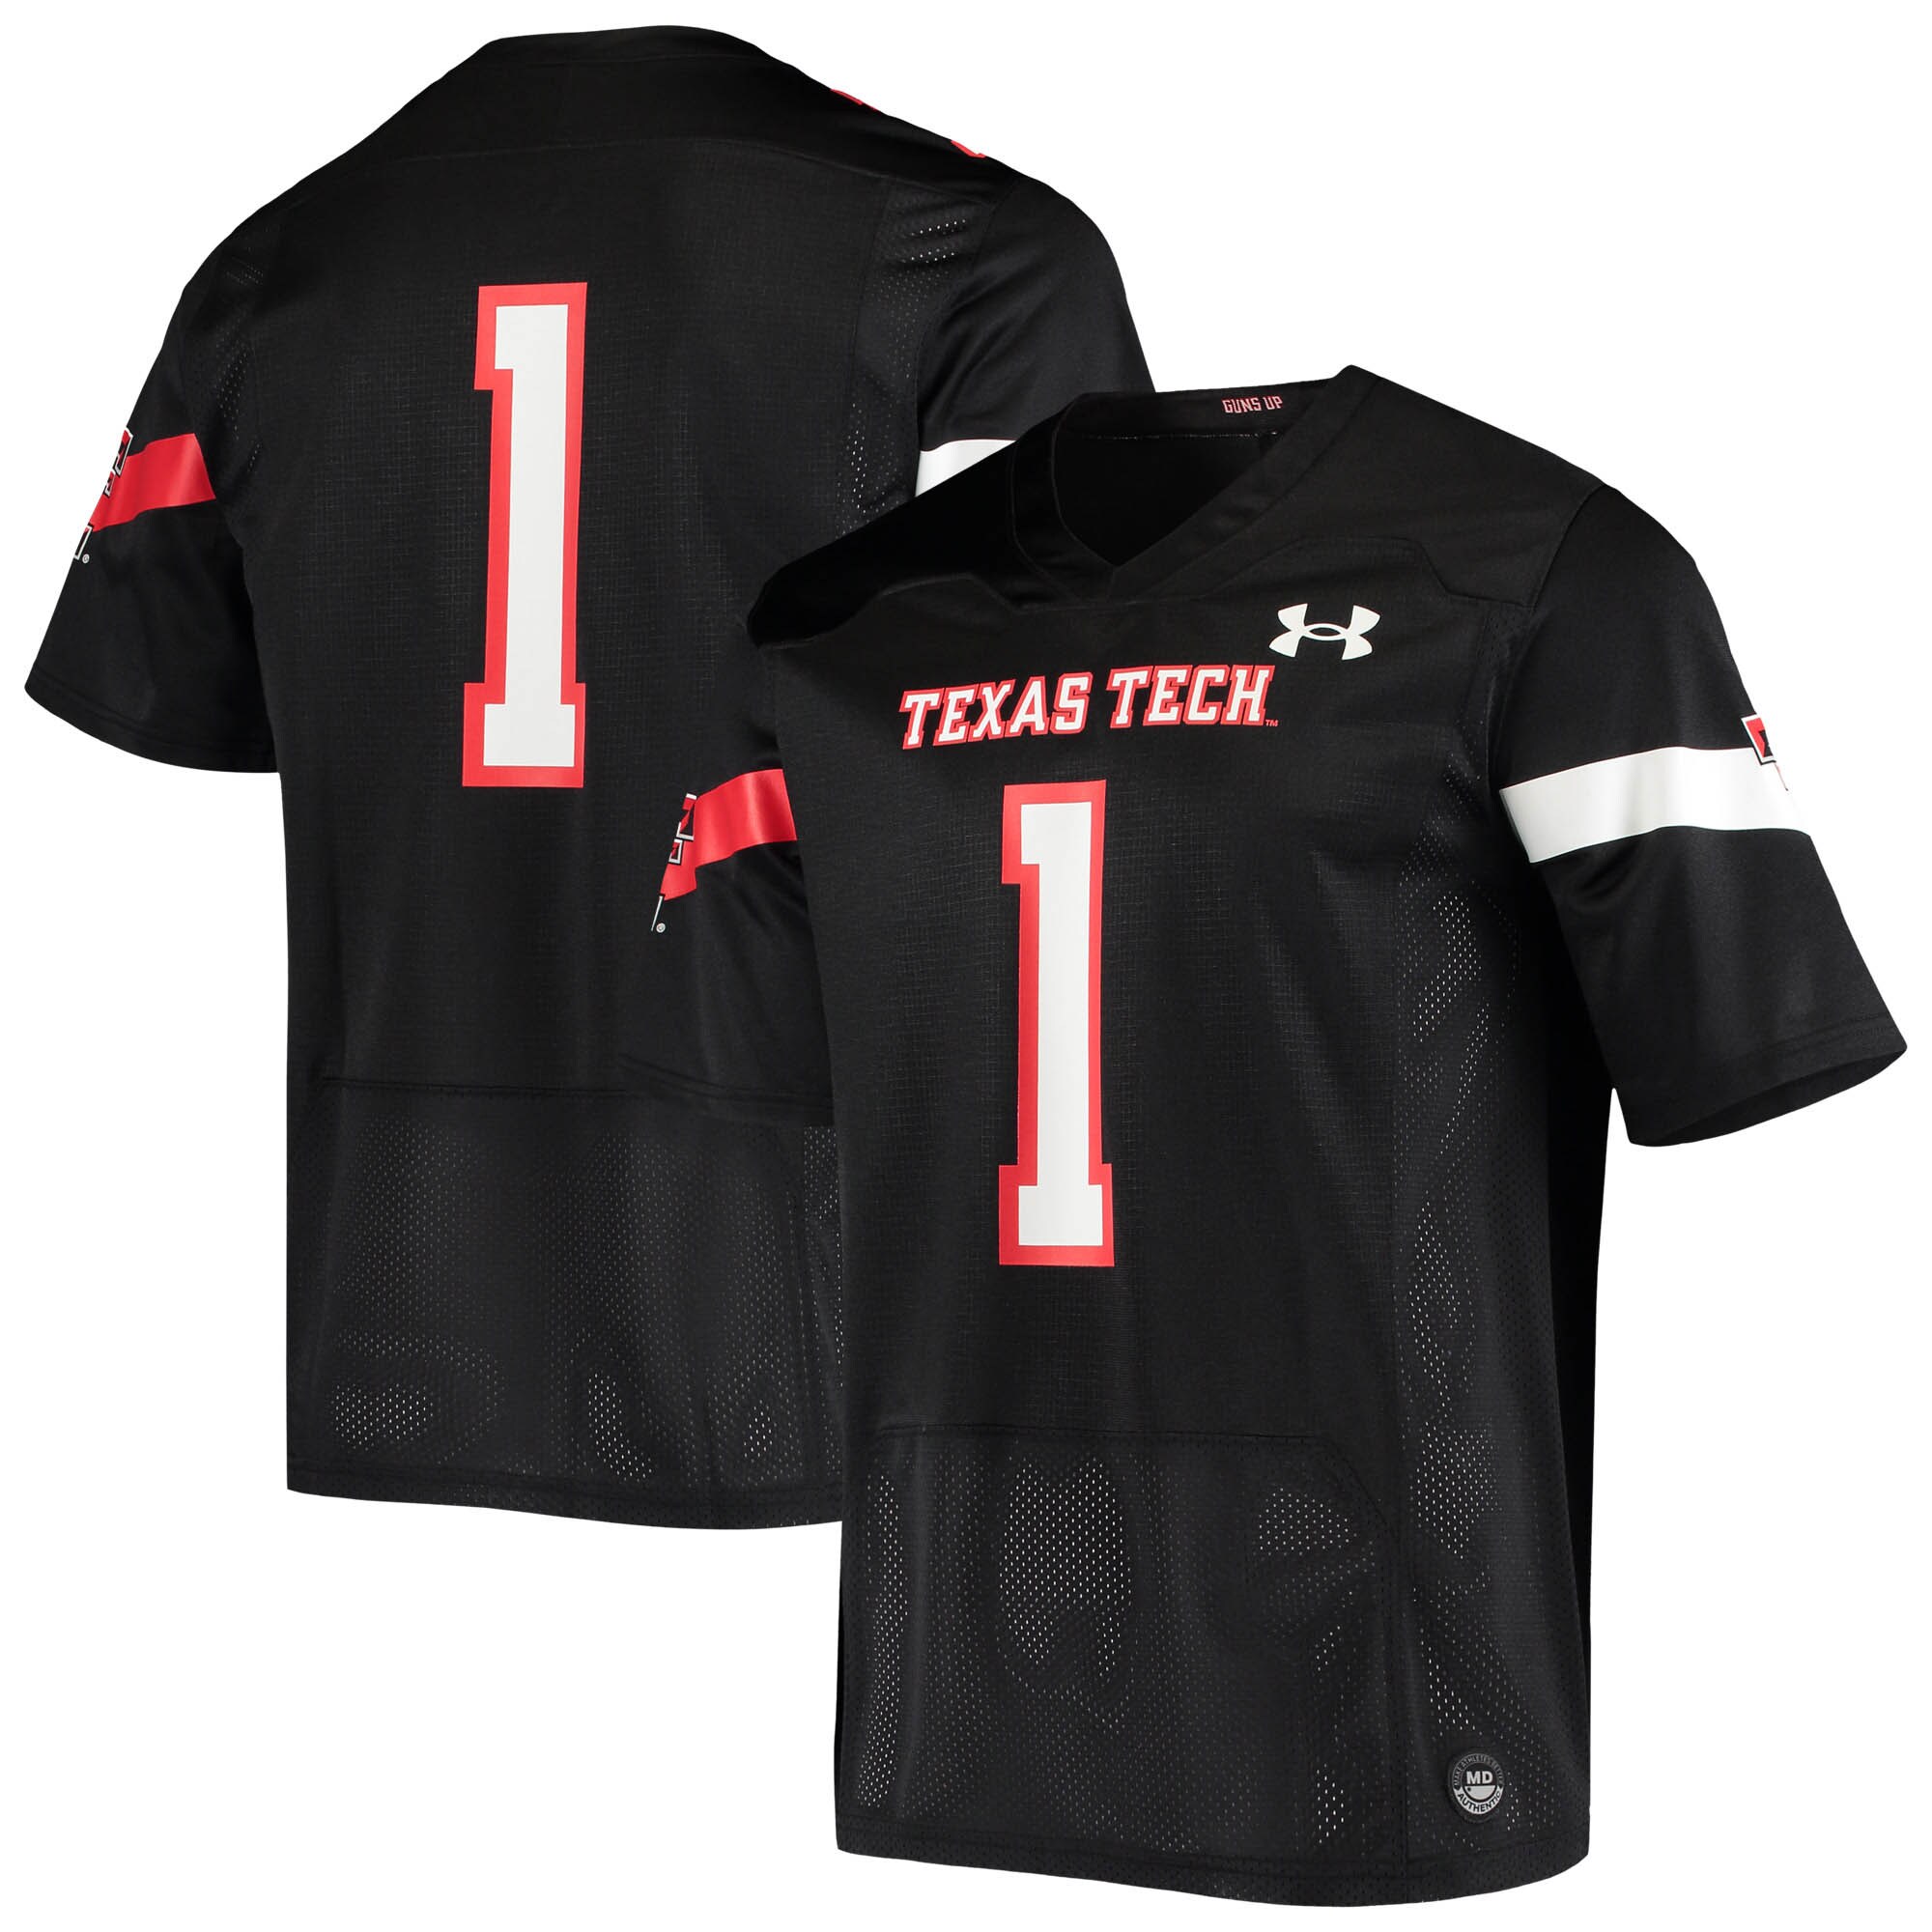 #1 Texas Tech Red Raiders Under Armour Logo Replica  Football Shirts Jersey - Black For Youth Women Men